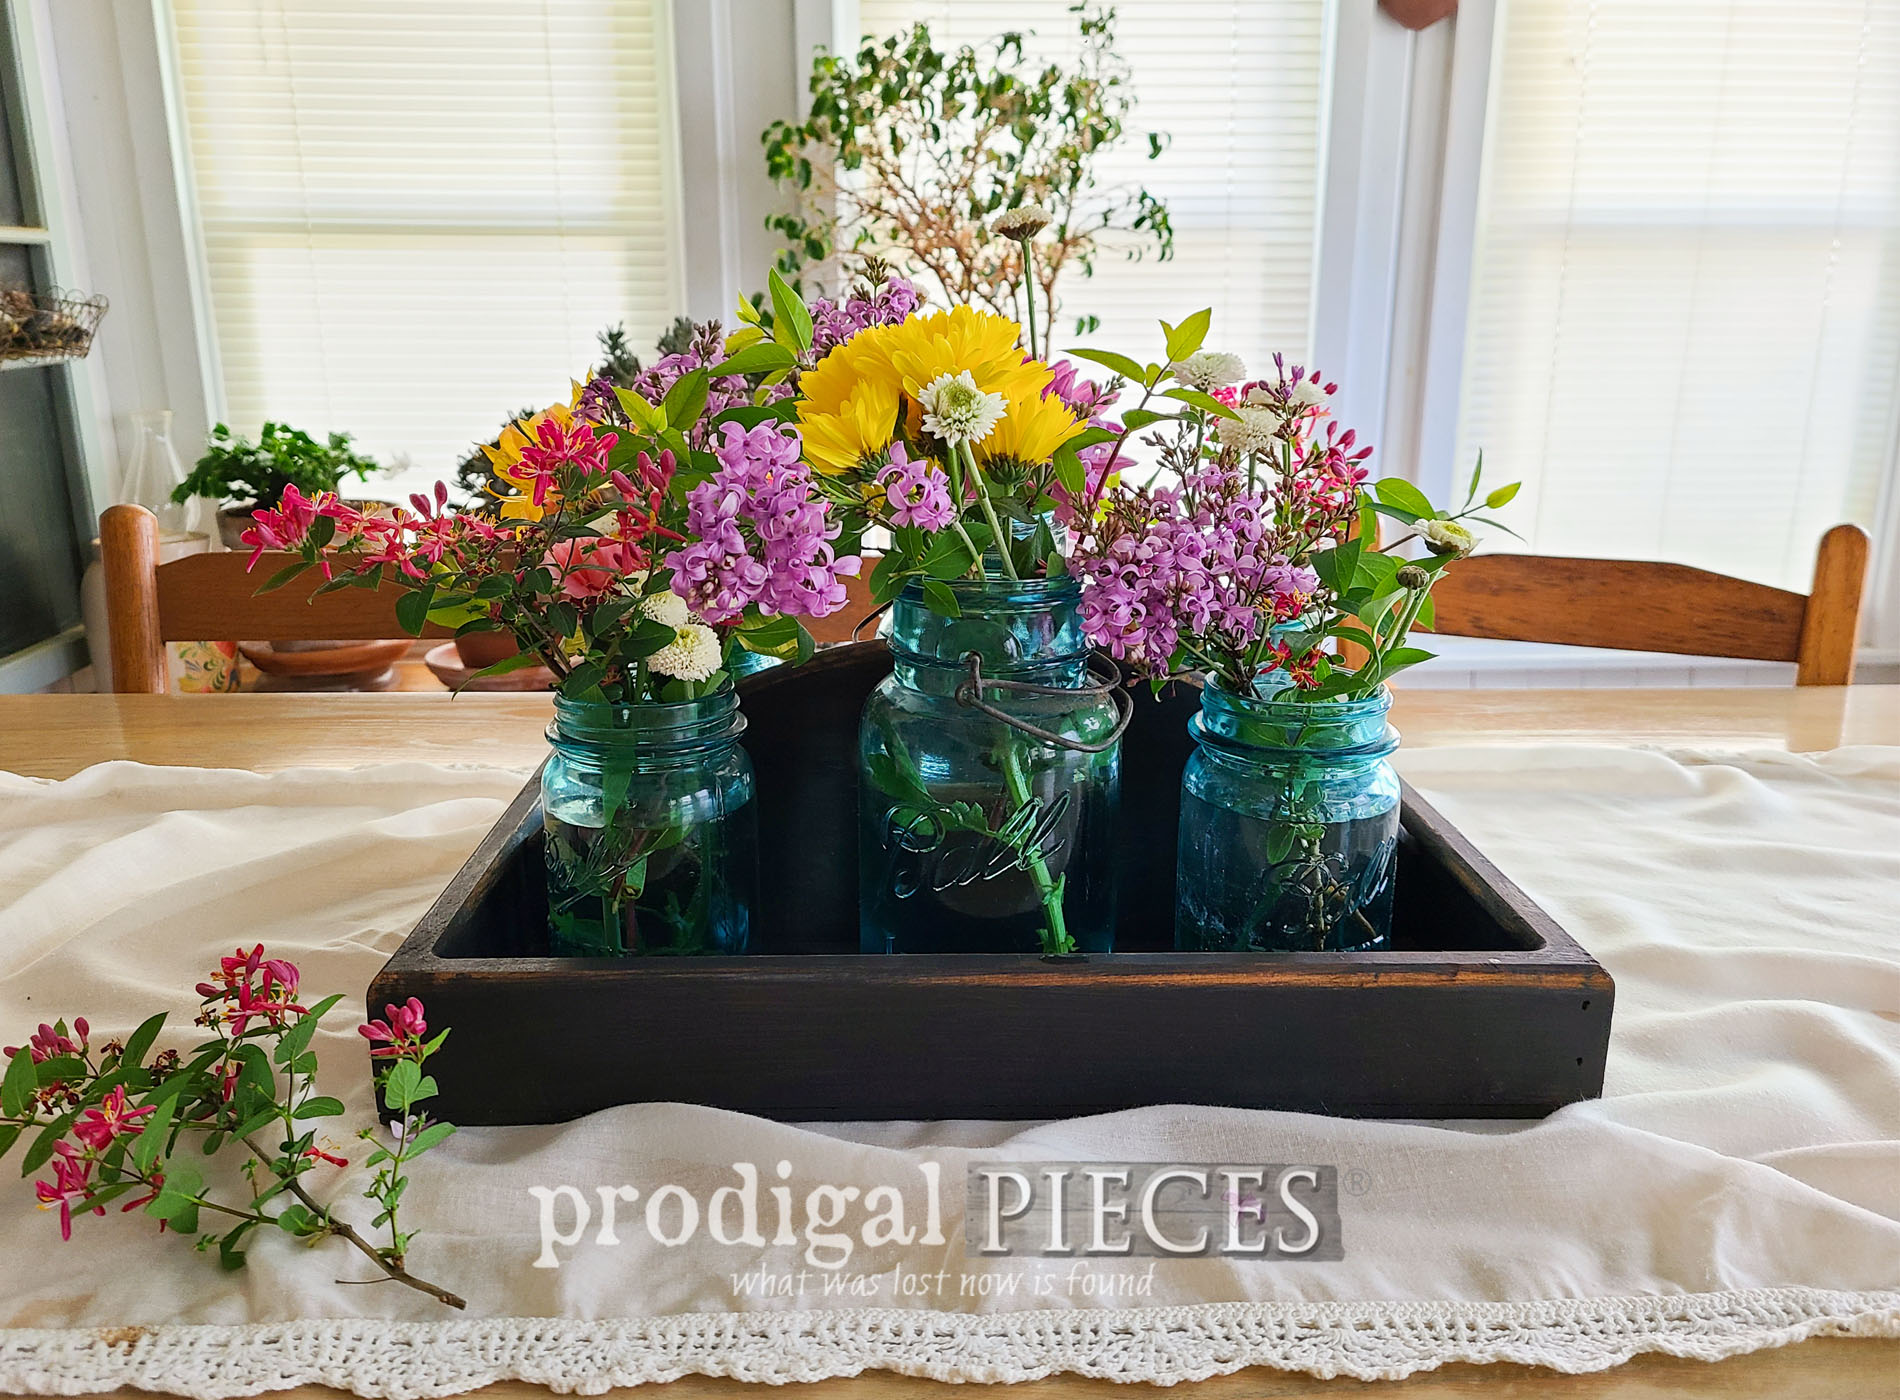 Featured Farmhouse Totes Makeover from Thrifted Finds by Larissa of Prodigal PIeces | prodigalpieces.com #prodigalpieces #farmhouse #diy #homedecor